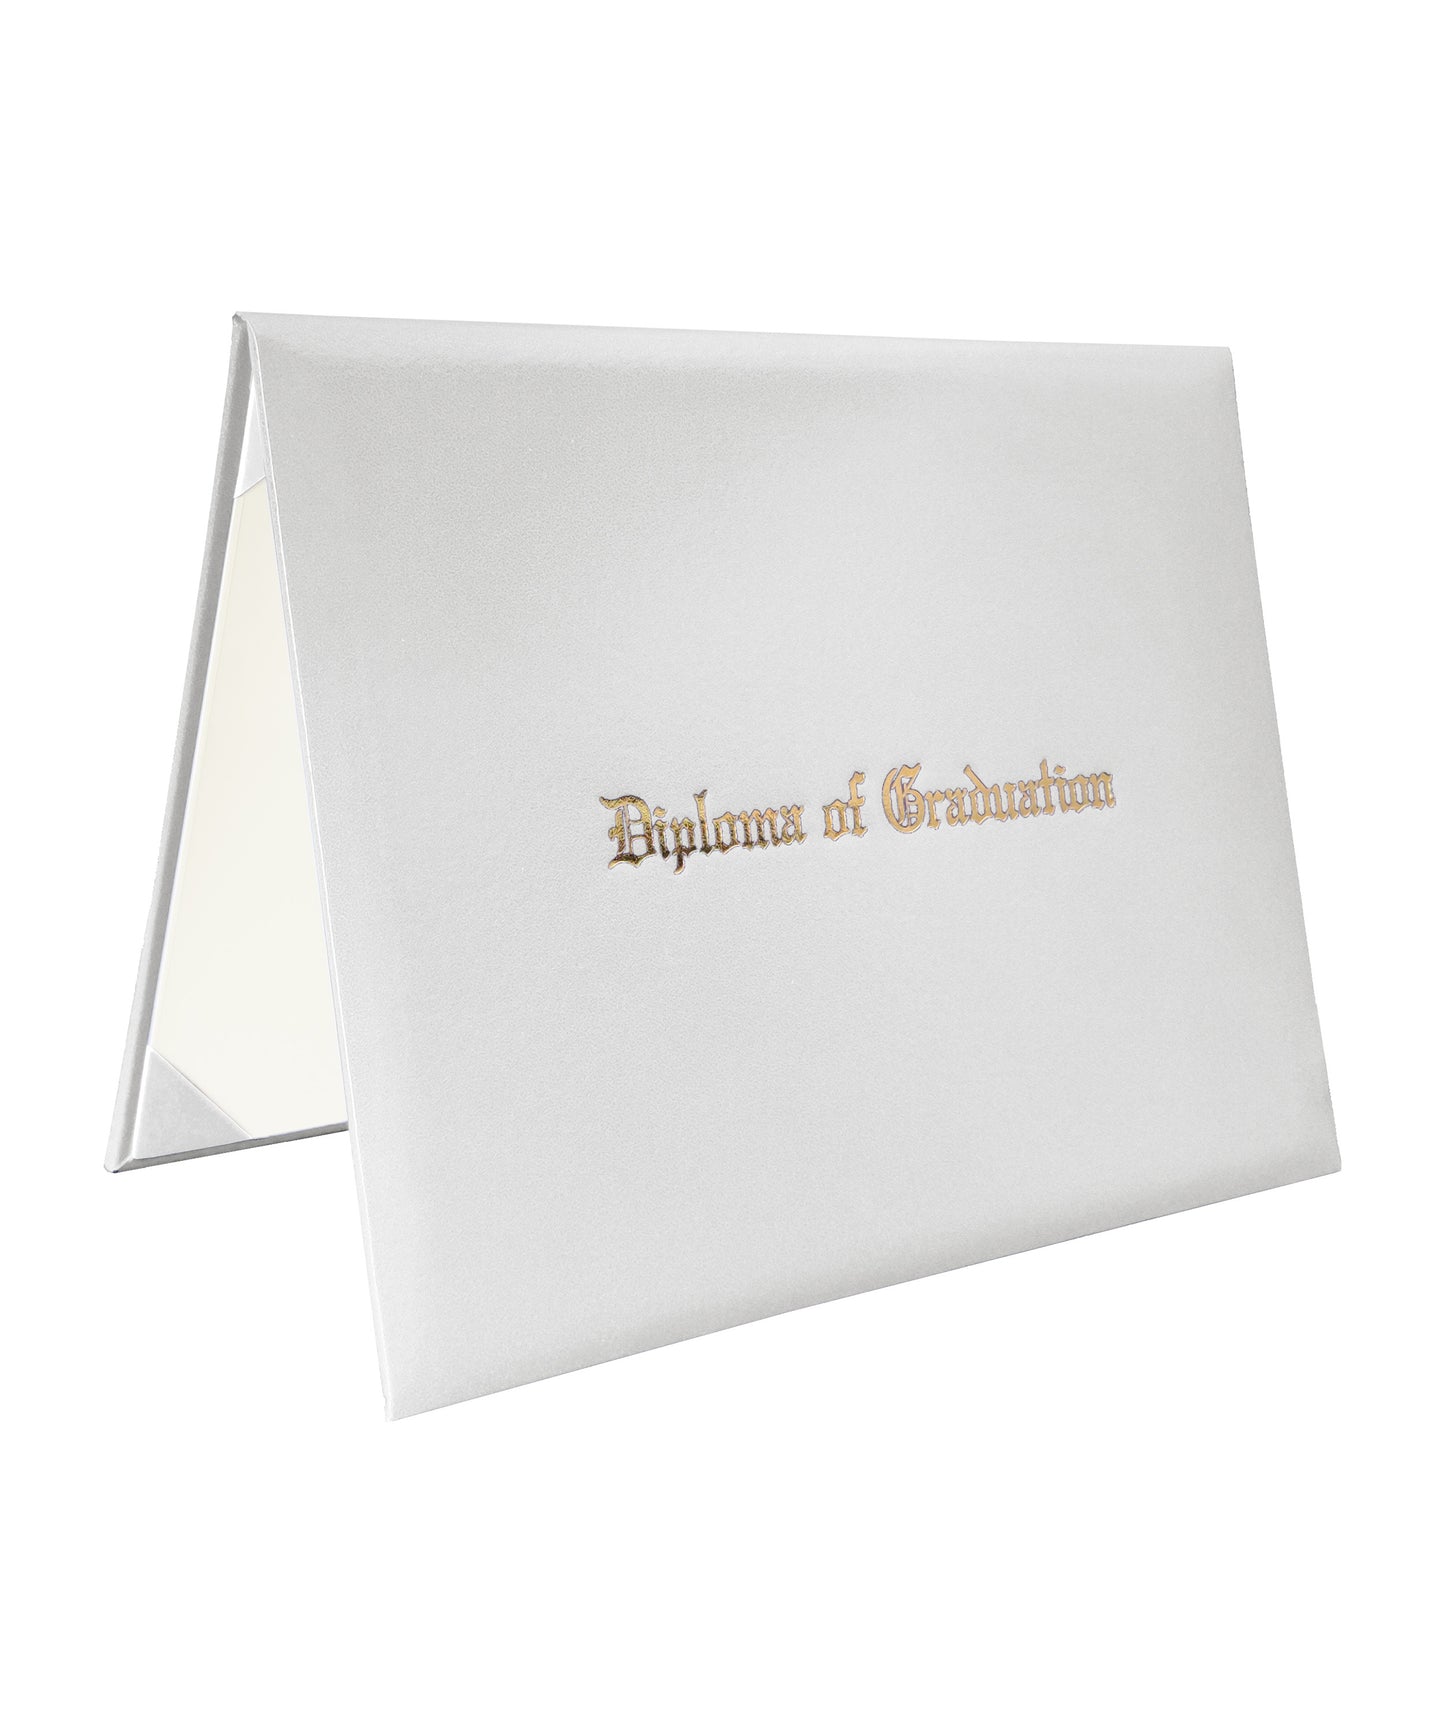 Imprinted Diploma Cover for Certificate or Documents 8 1/2" x 11" (Tent Style) Diploma Holder Leather Folders-CA graduation